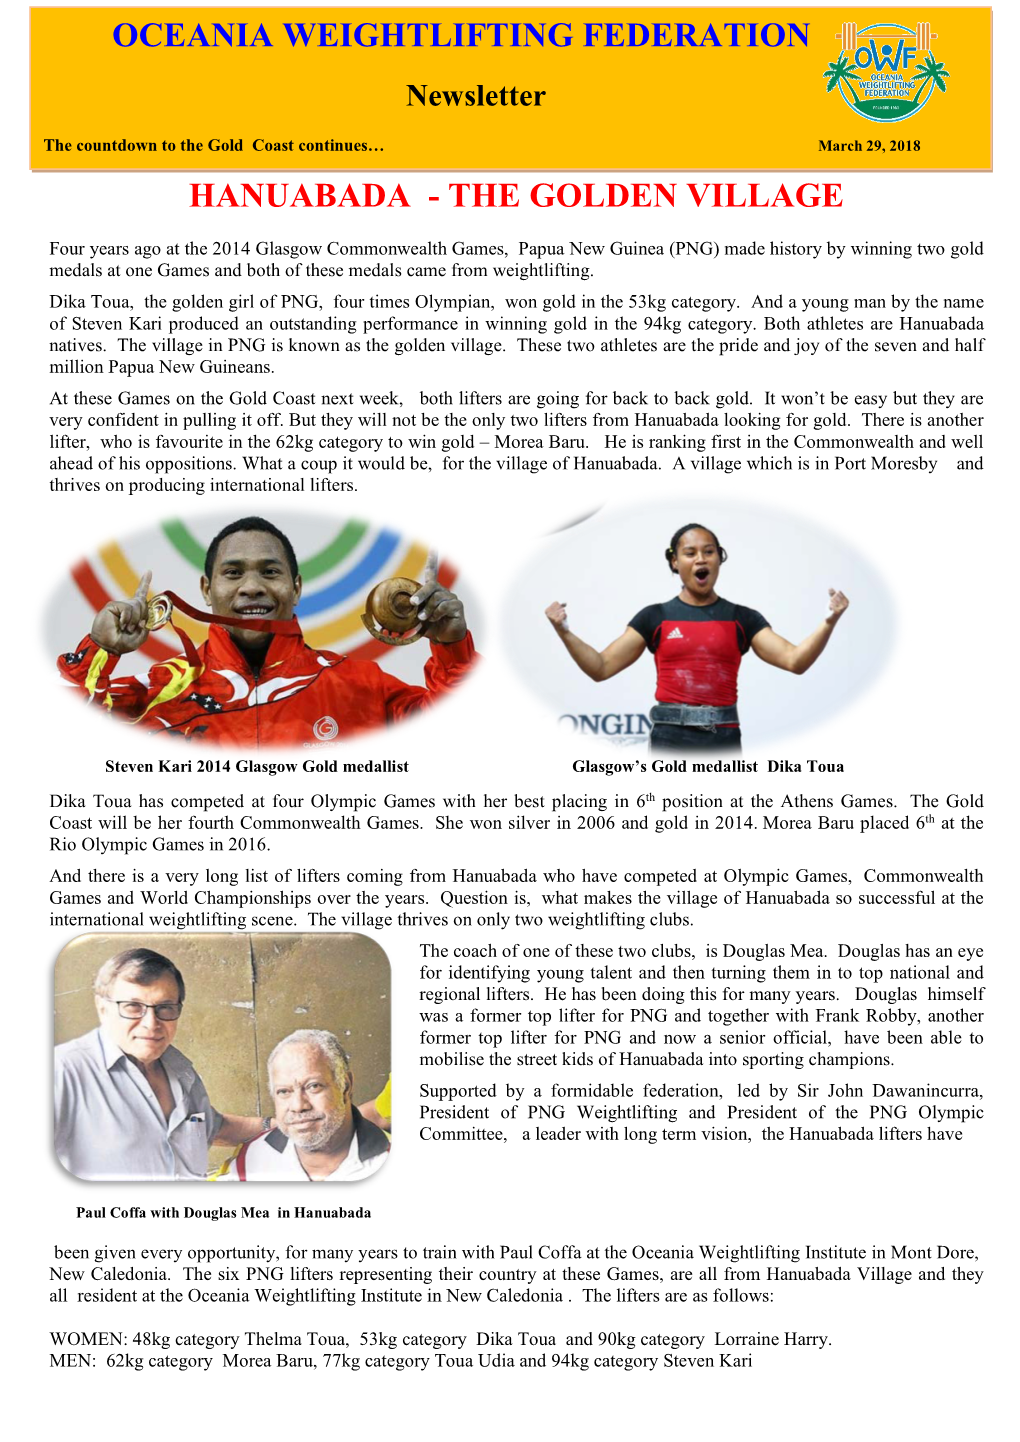 OWF Newsletter Papua New Guinea